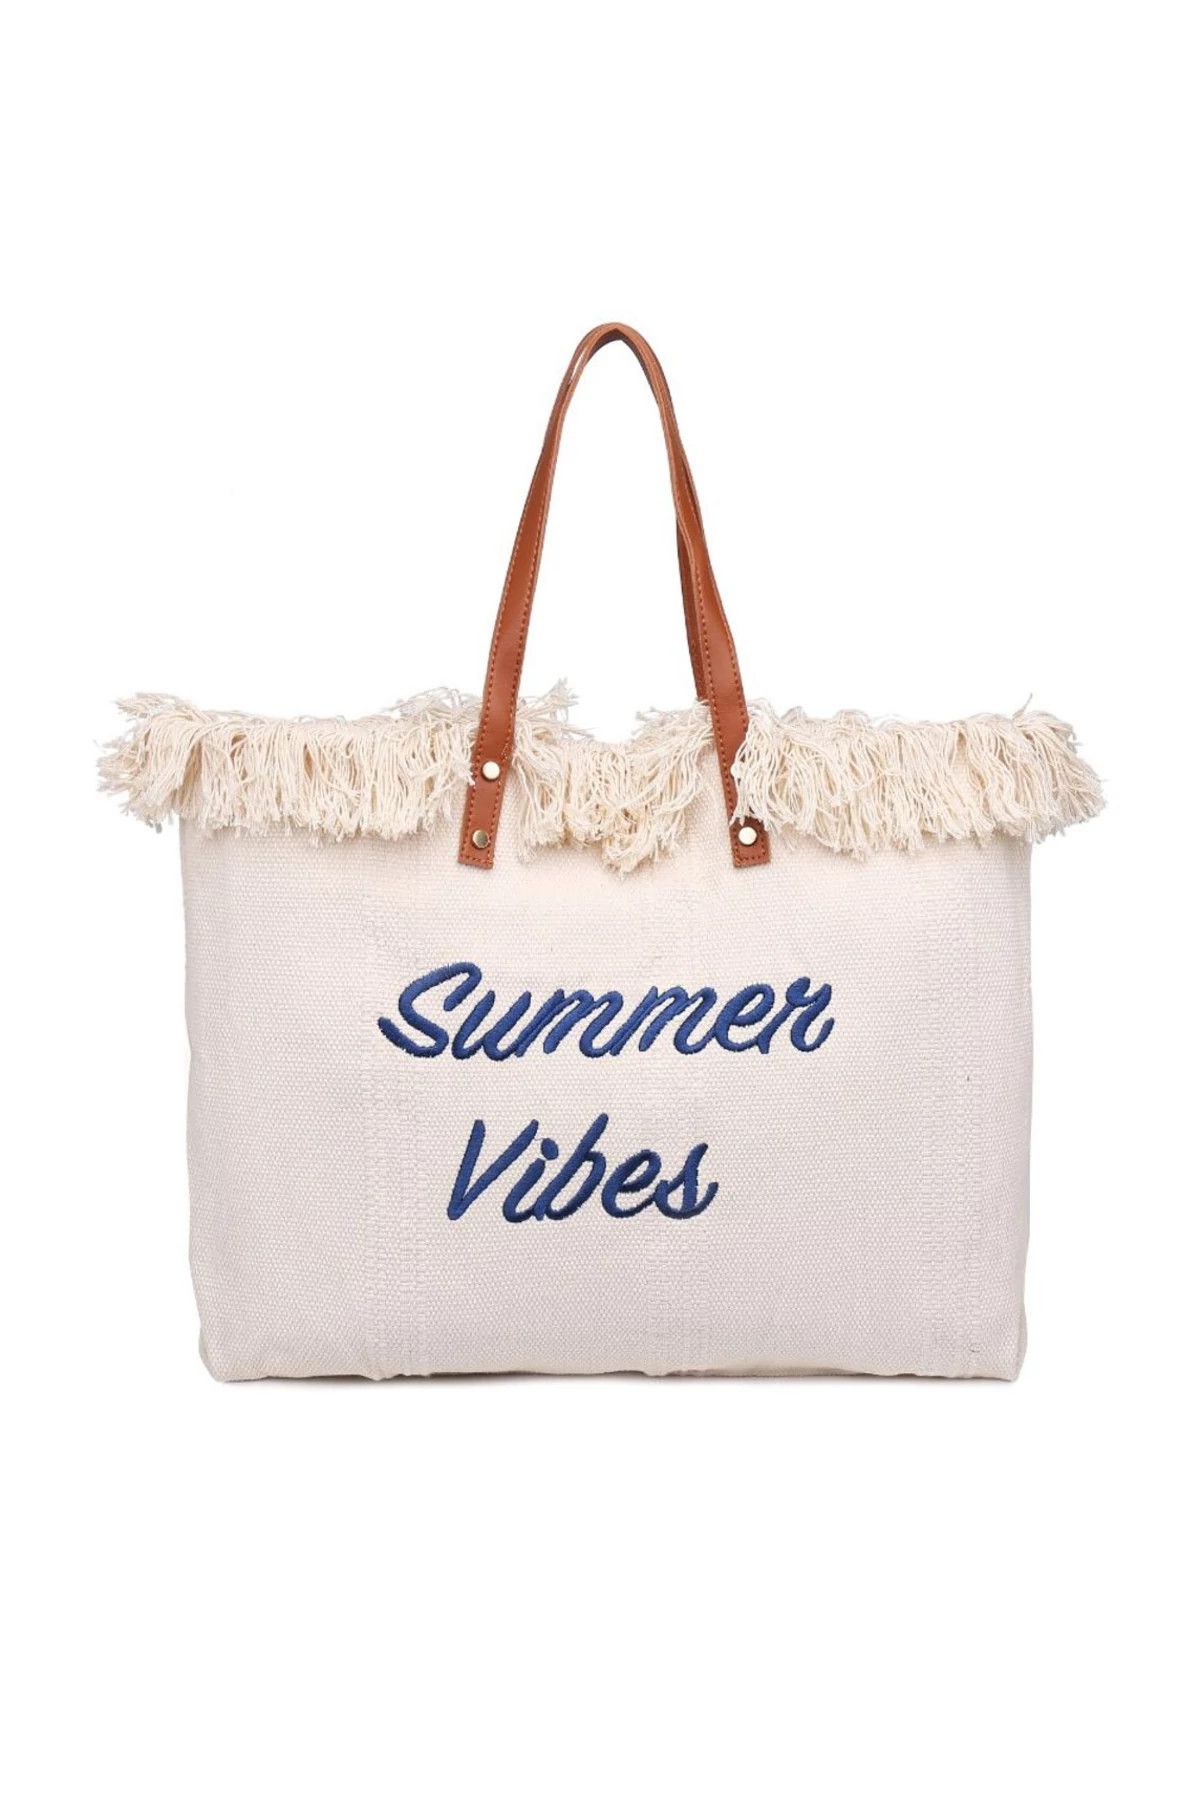 Summer Vibes Tote | Everything But Water